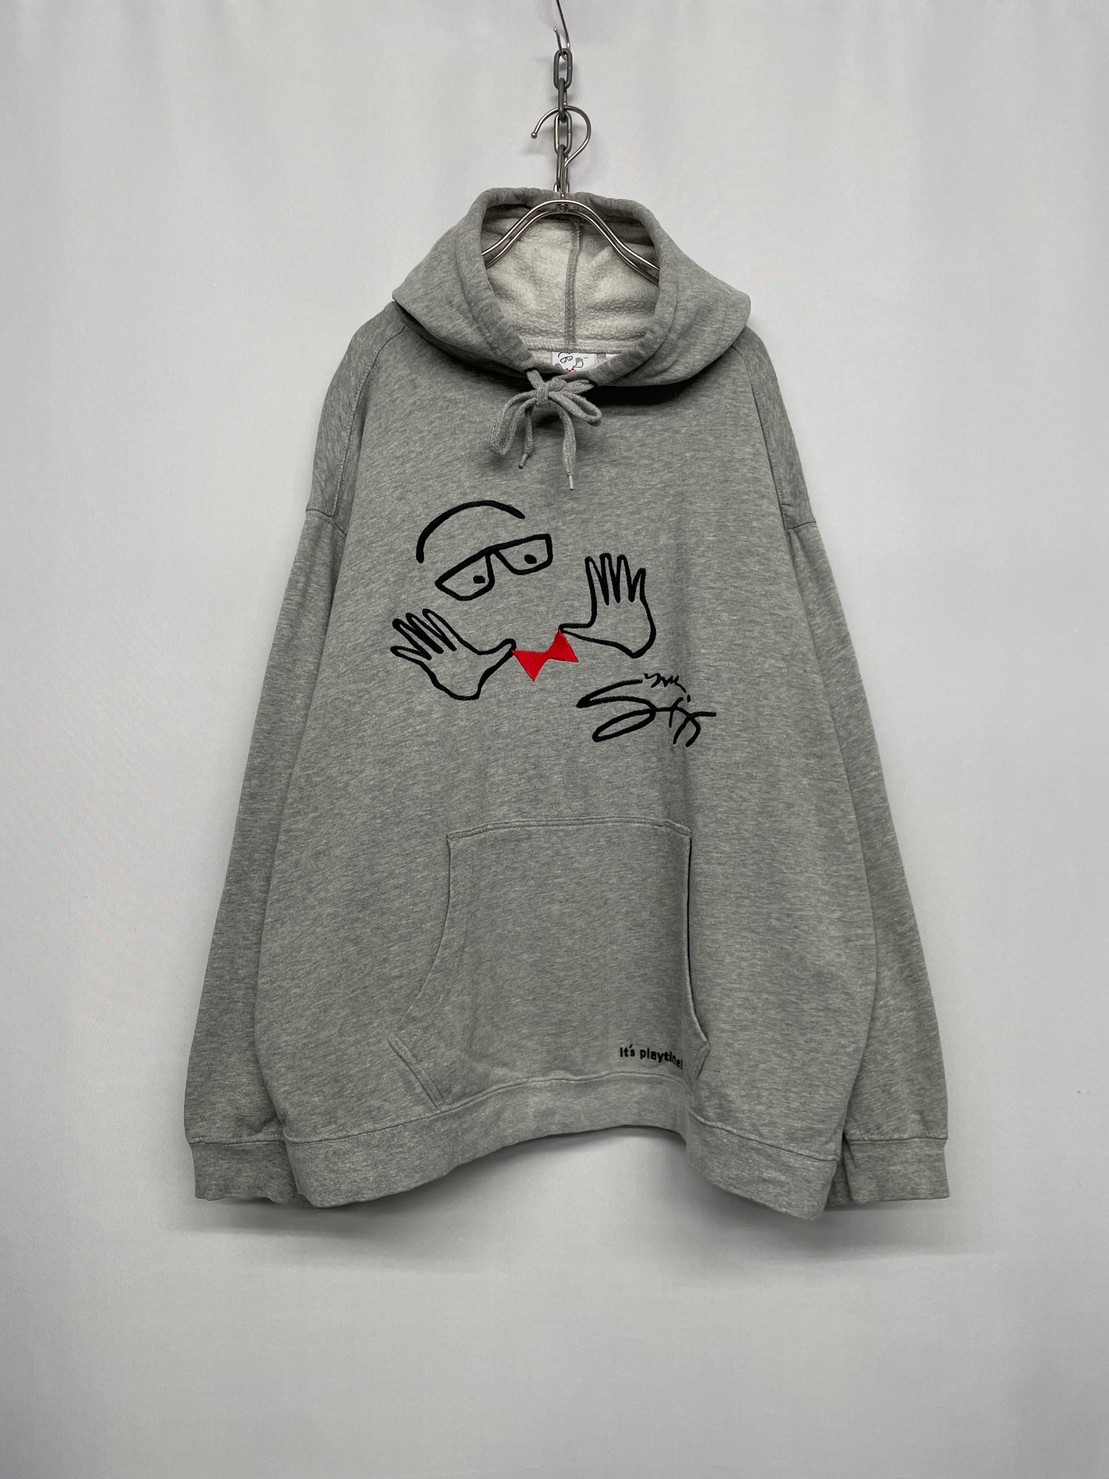 00’s “Mr. SIX” Embroidered Hoodie